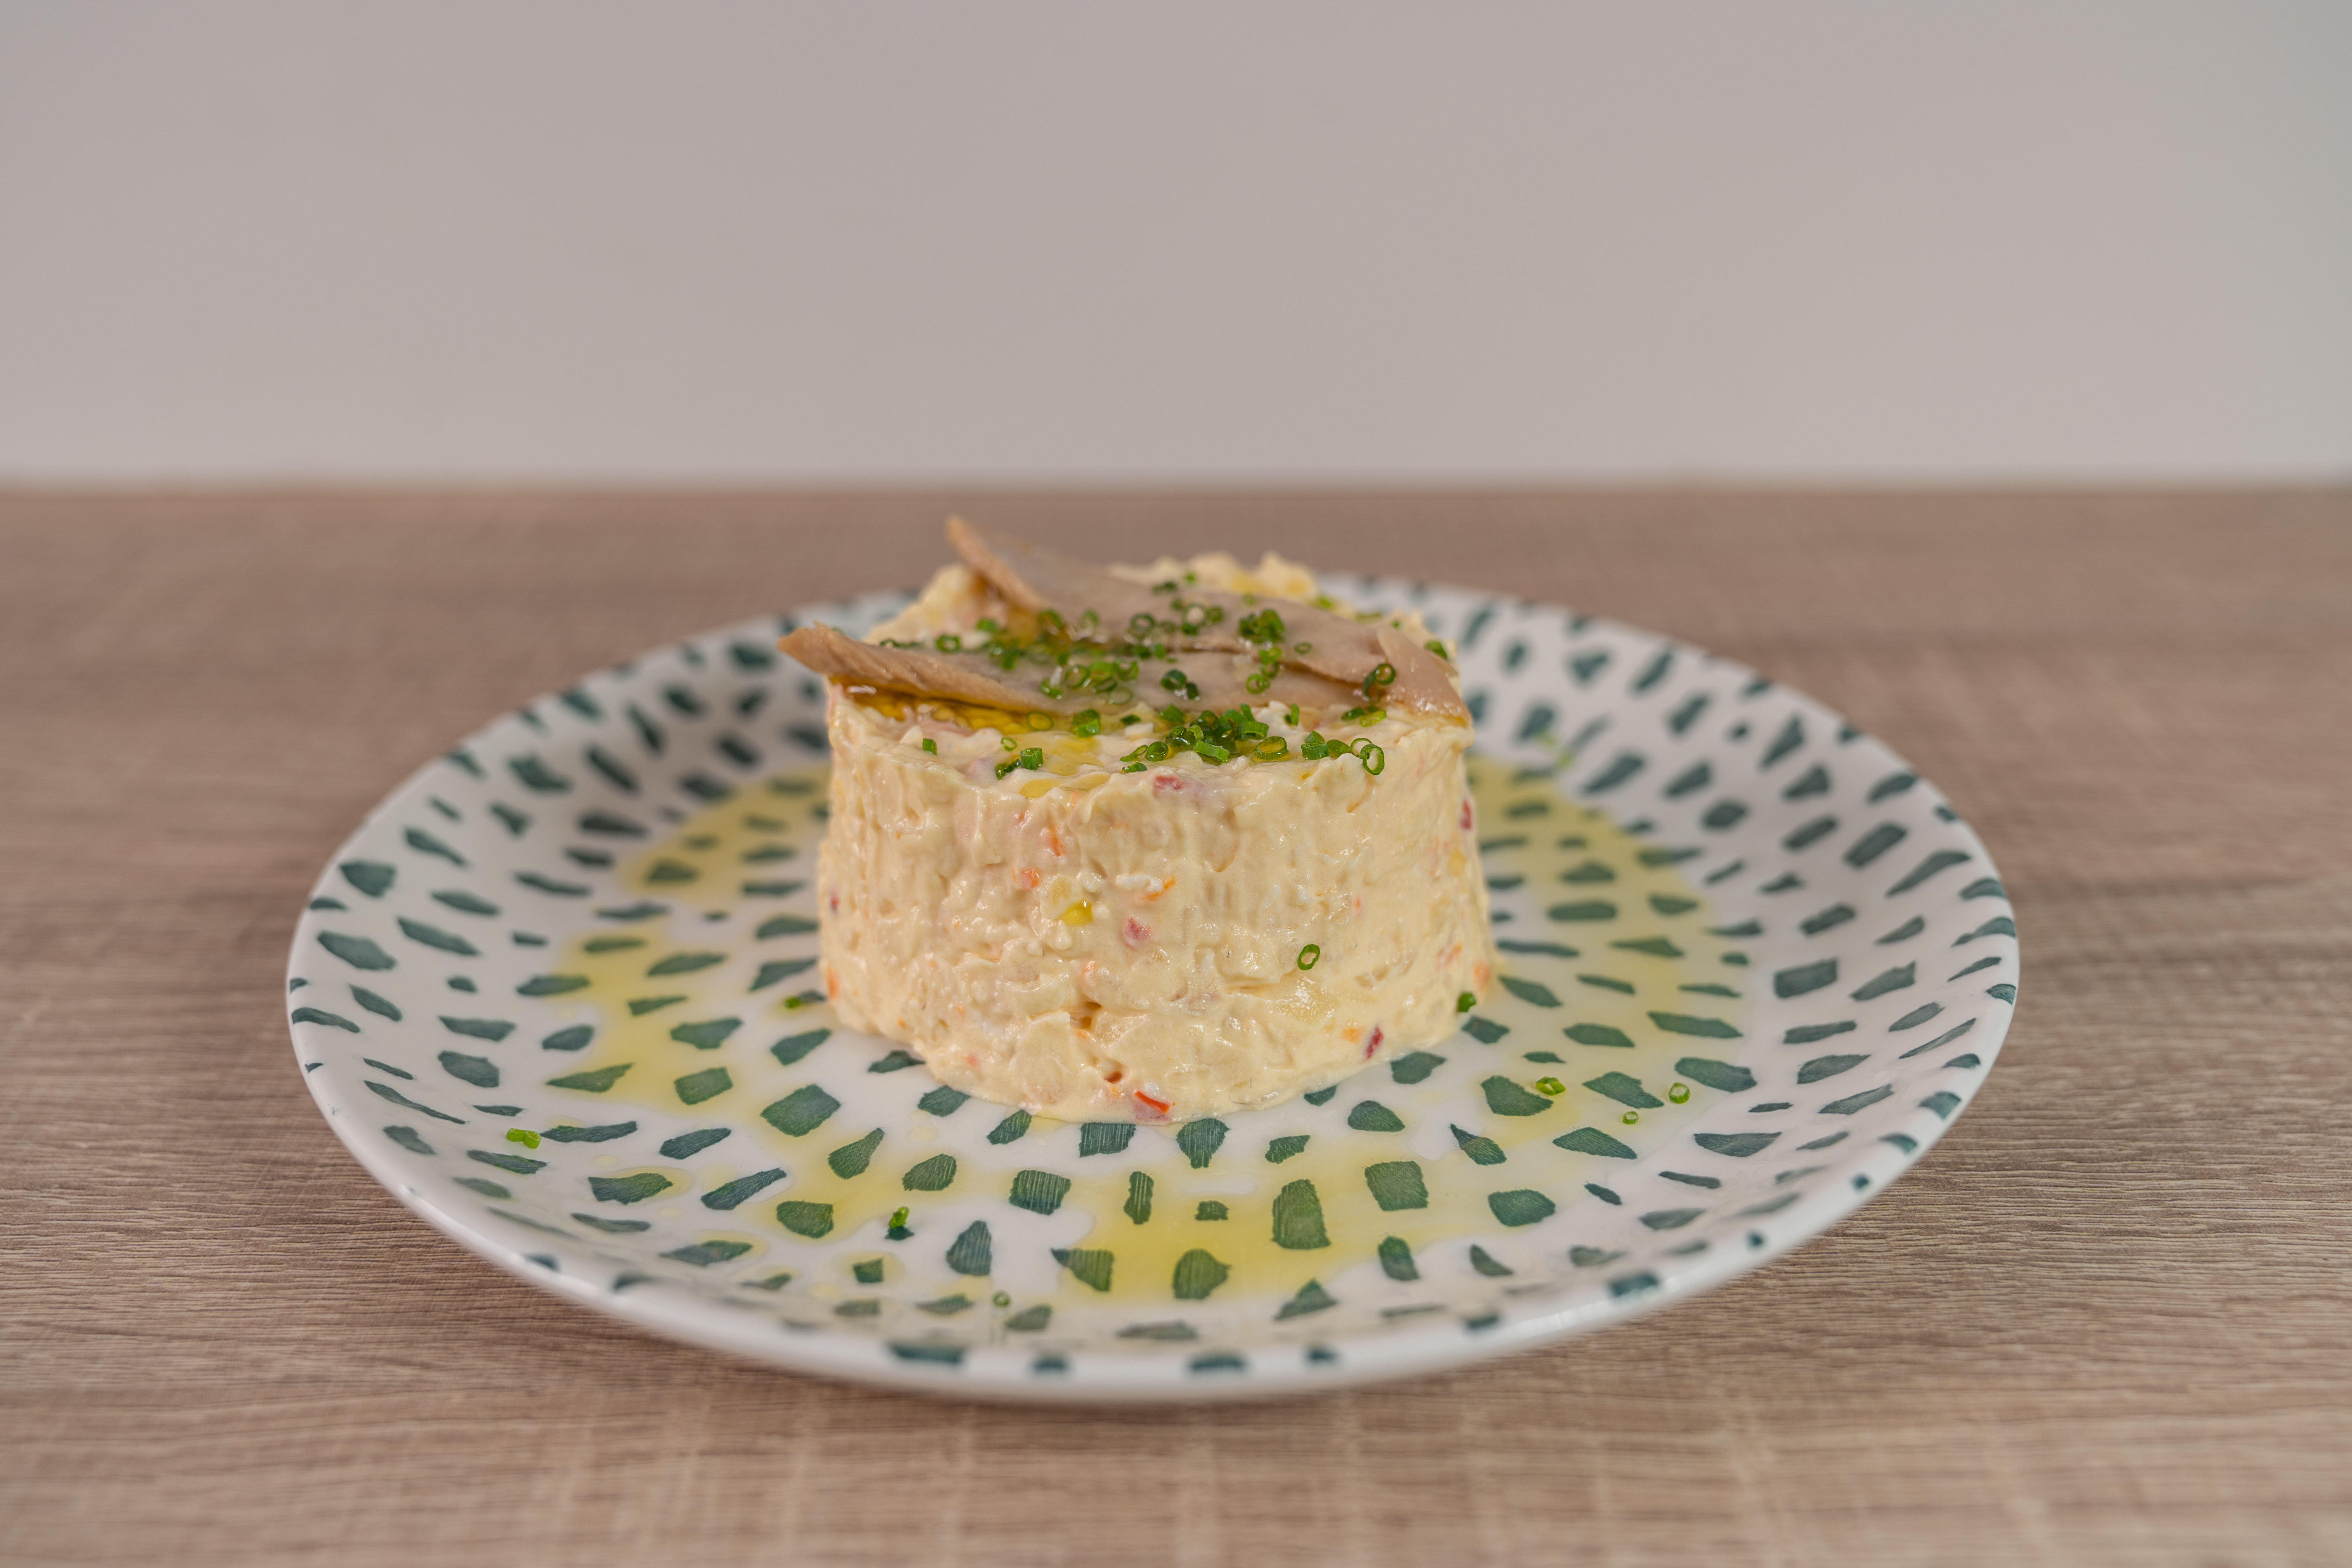 Russian Salad with Tuna Belly